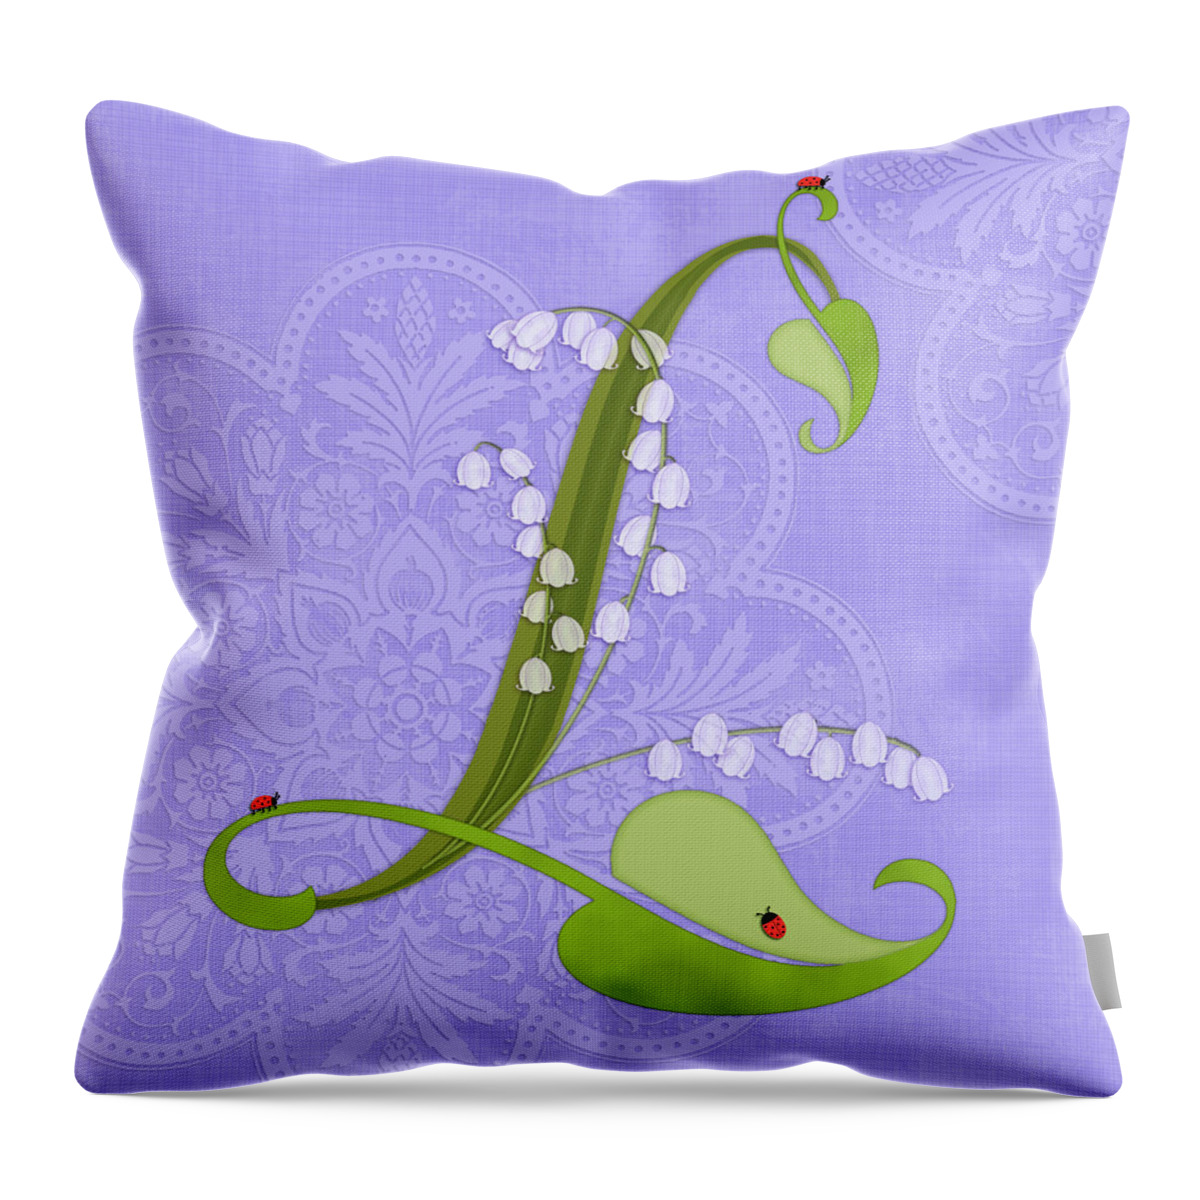 Letter Throw Pillow featuring the digital art The Letter L for Lily of the Valley by Valerie Drake Lesiak